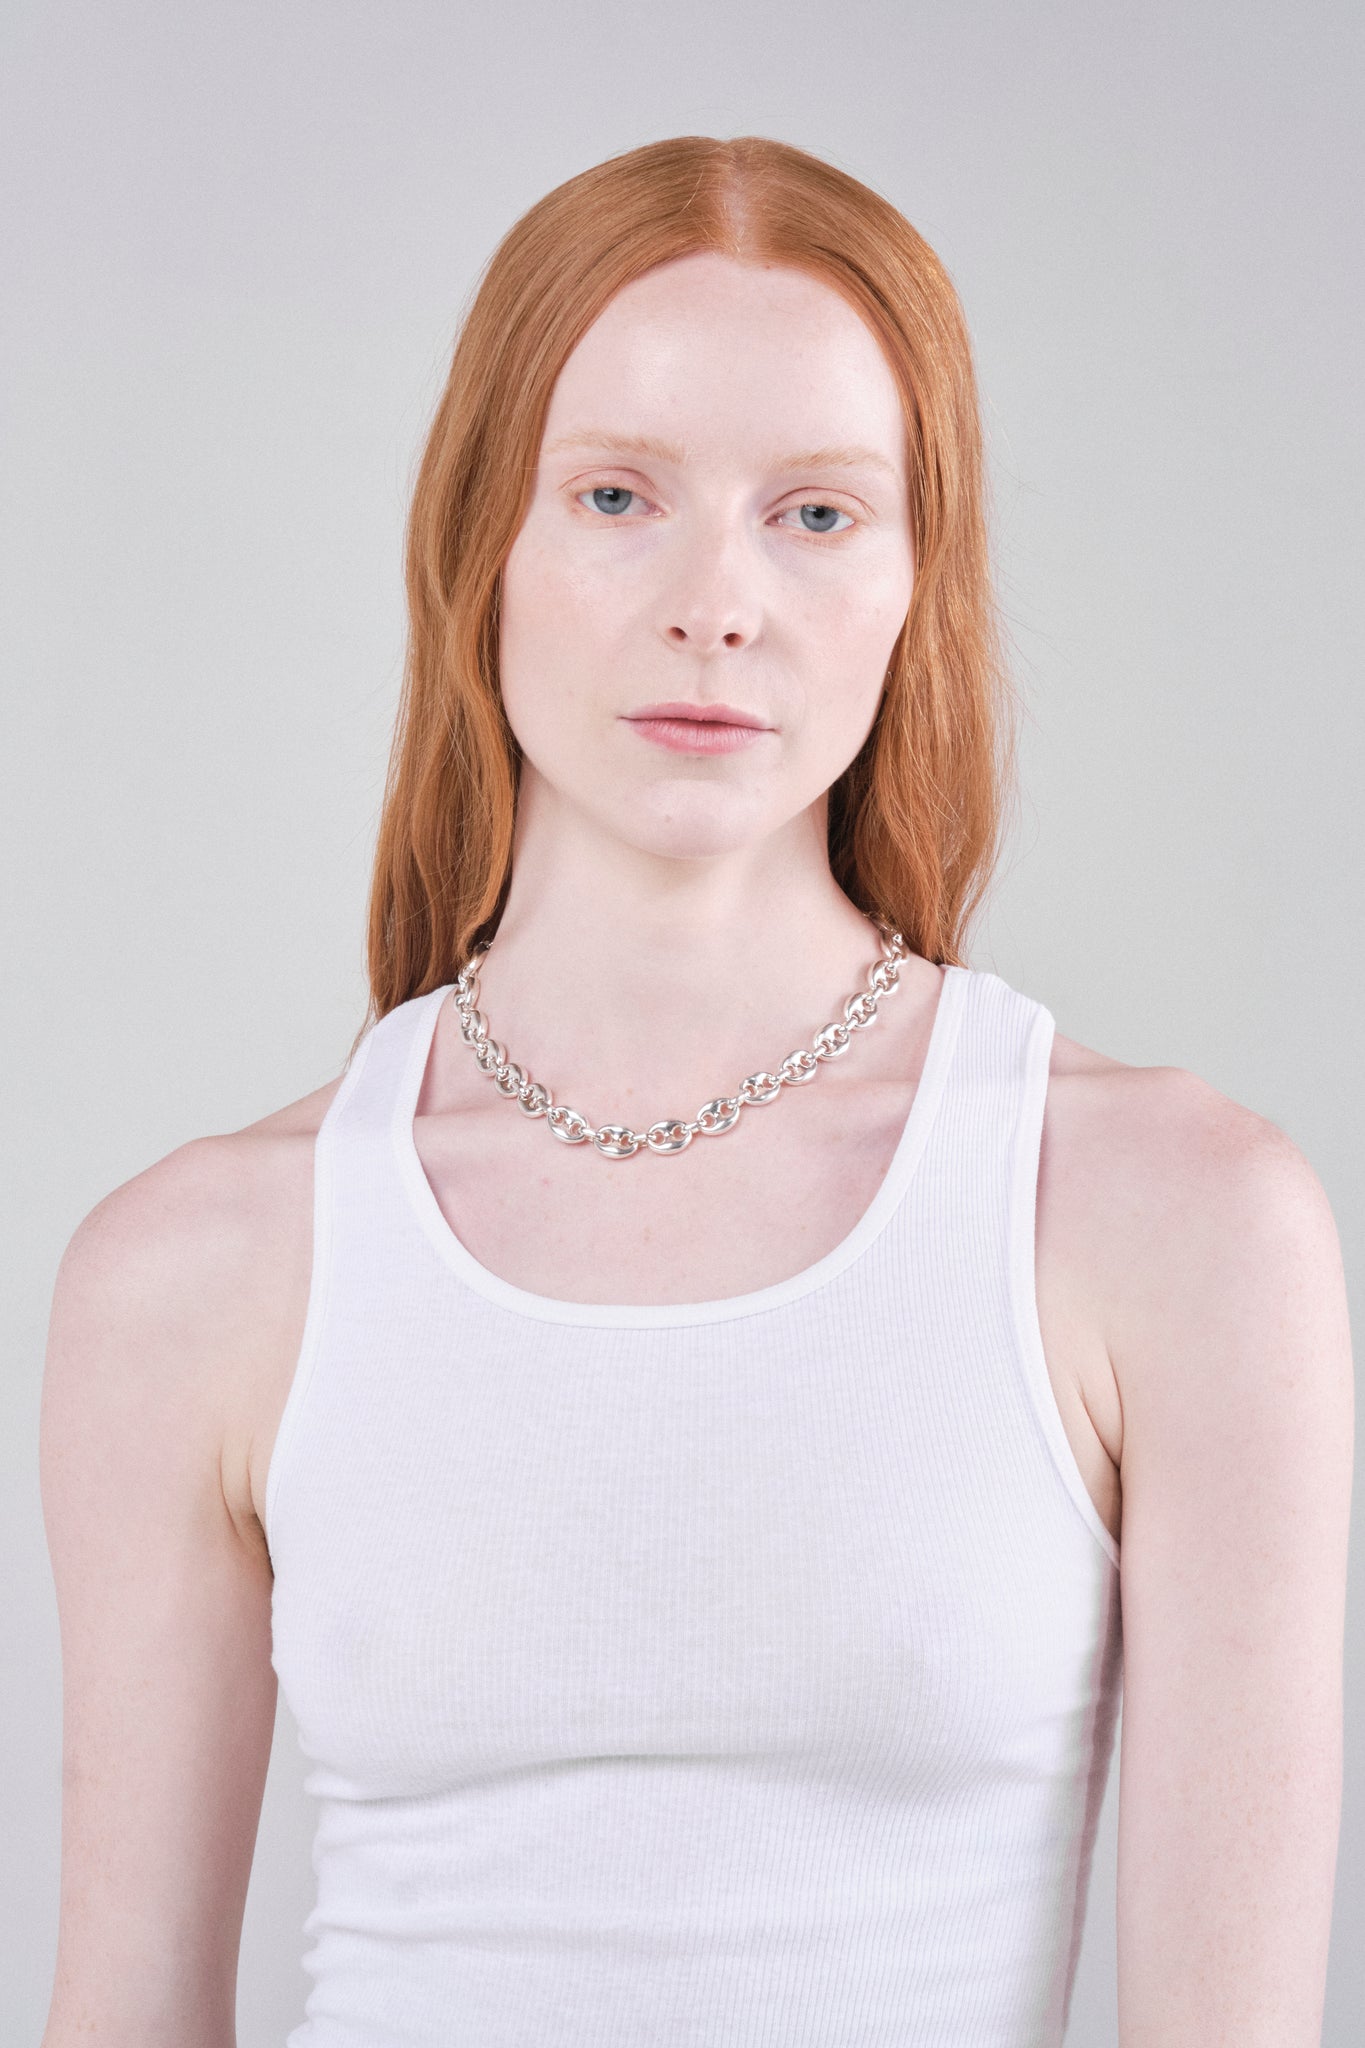 The Marin Chain Link Necklace